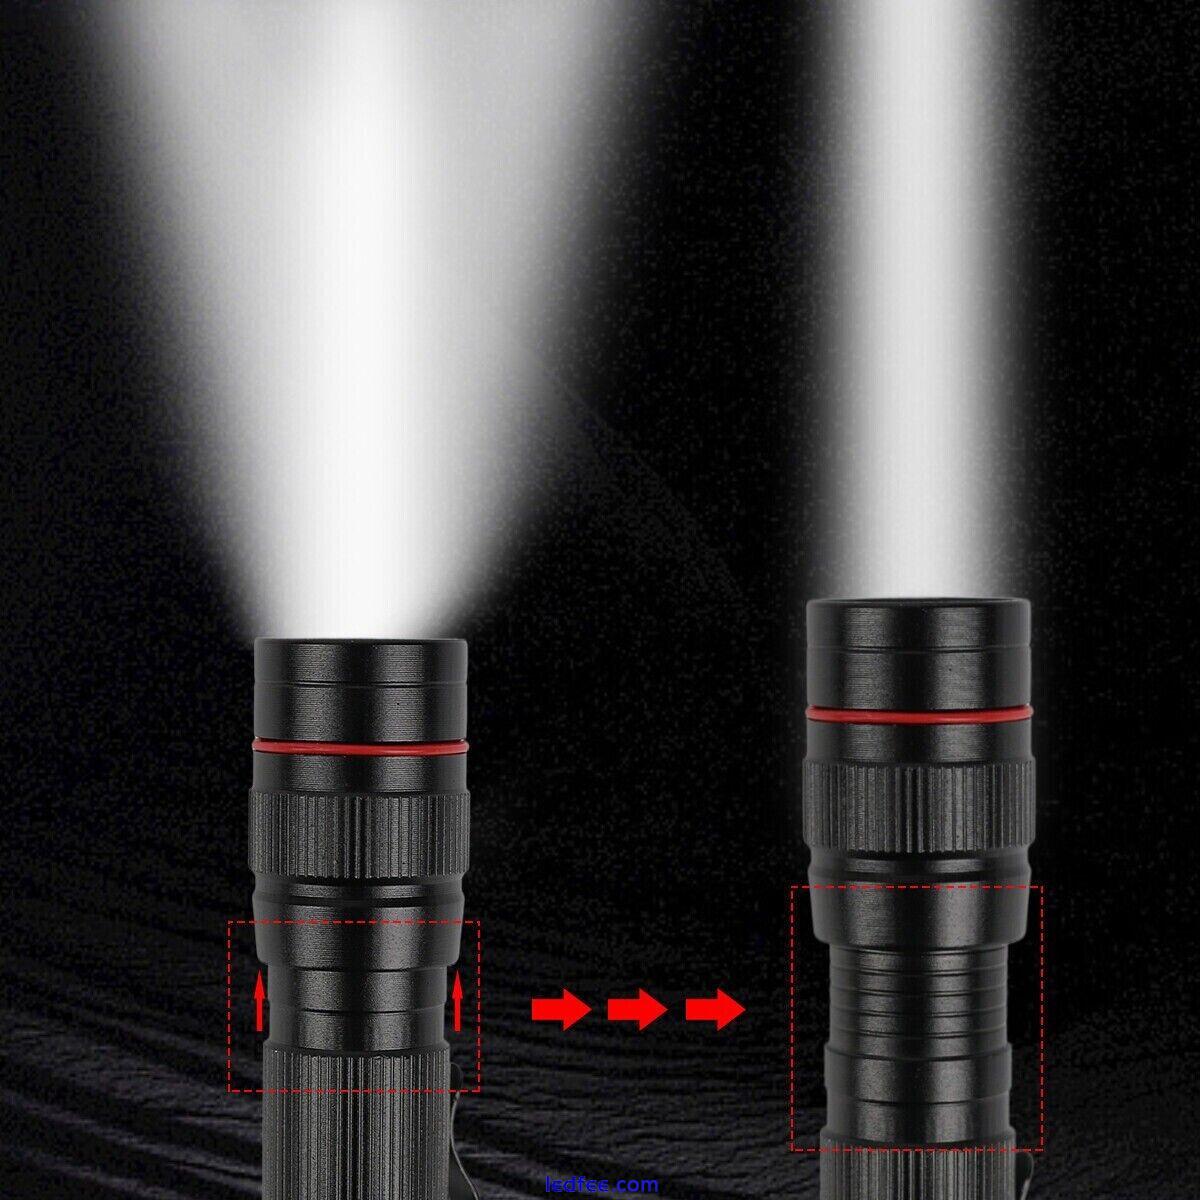 Mini USB Rechargeable 1200000LM LED Flashlight Torch Tactical Outdoor Lamp 1 